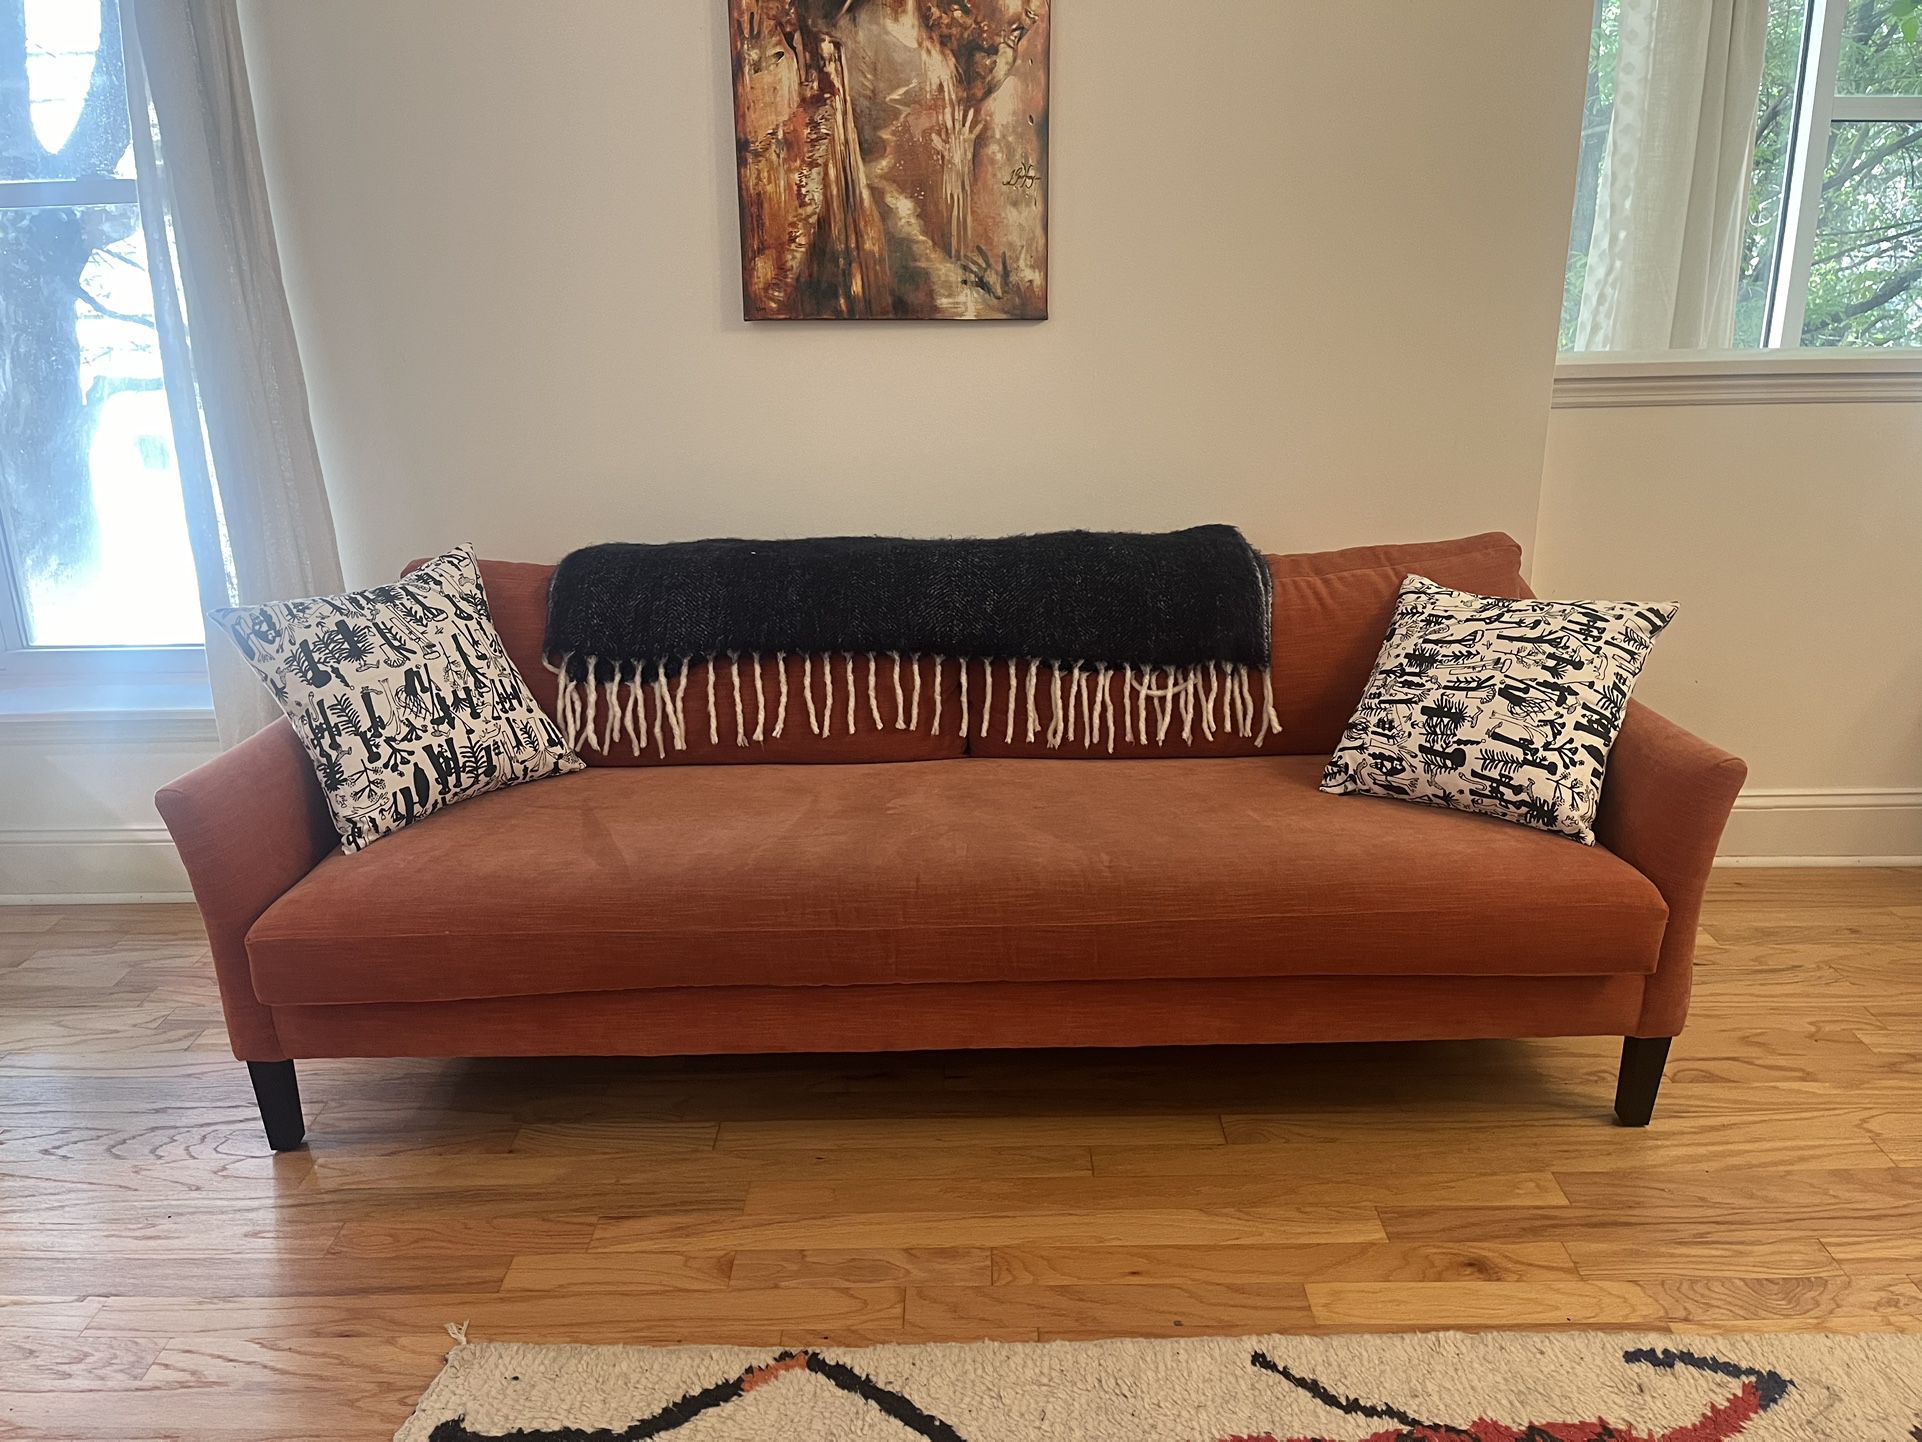 Salmon couch from Urban Supply